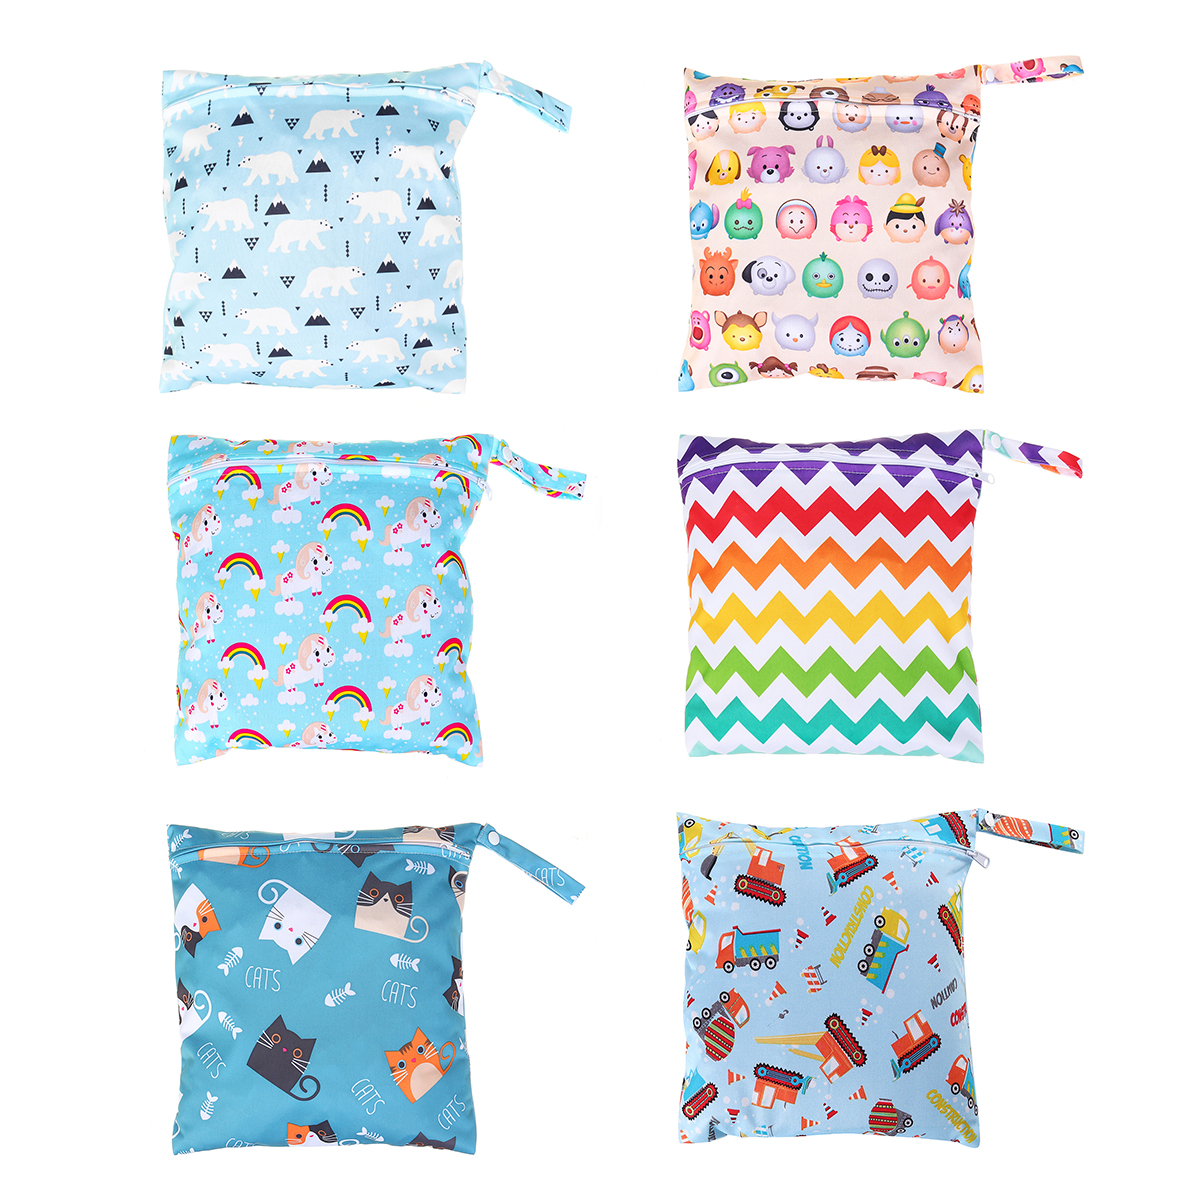 Reusable-Waterproof-Wet-Dry-Baby-Diapers-Bags-Portable-Travel-Baby-Nappy-Changing-Double-Pocket-Wetb-1647666-2